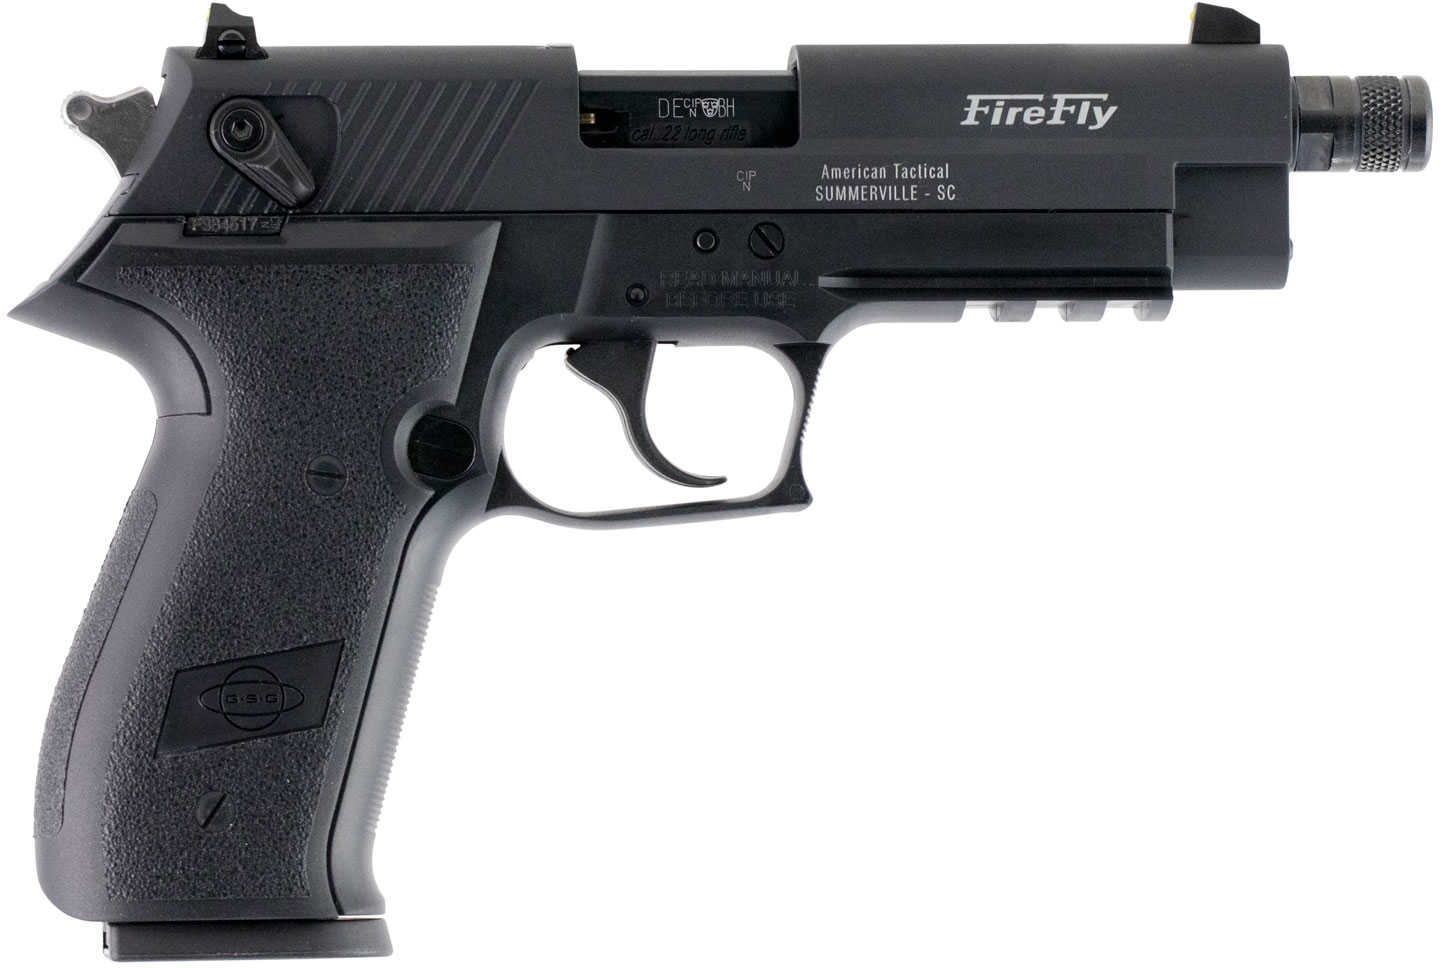 American Tactical Imports GSG Firefly Pistol 22 Long Rifle 4" Threaded Barrel Black 10 Rounds